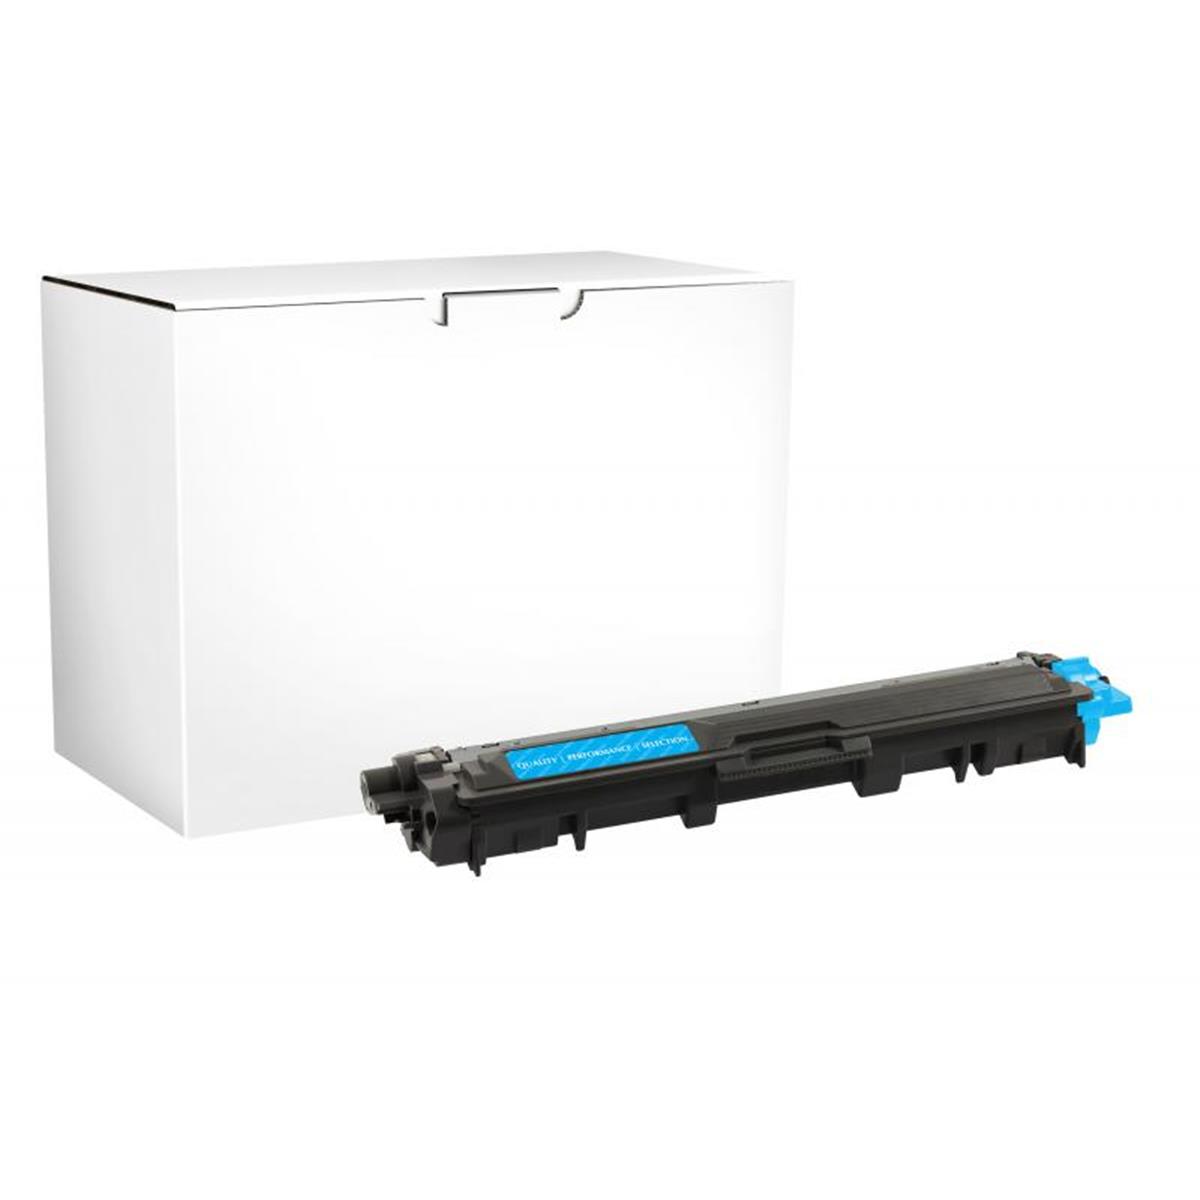 Picture of Brother 200729 Cyan Toner Cartridge for TN221